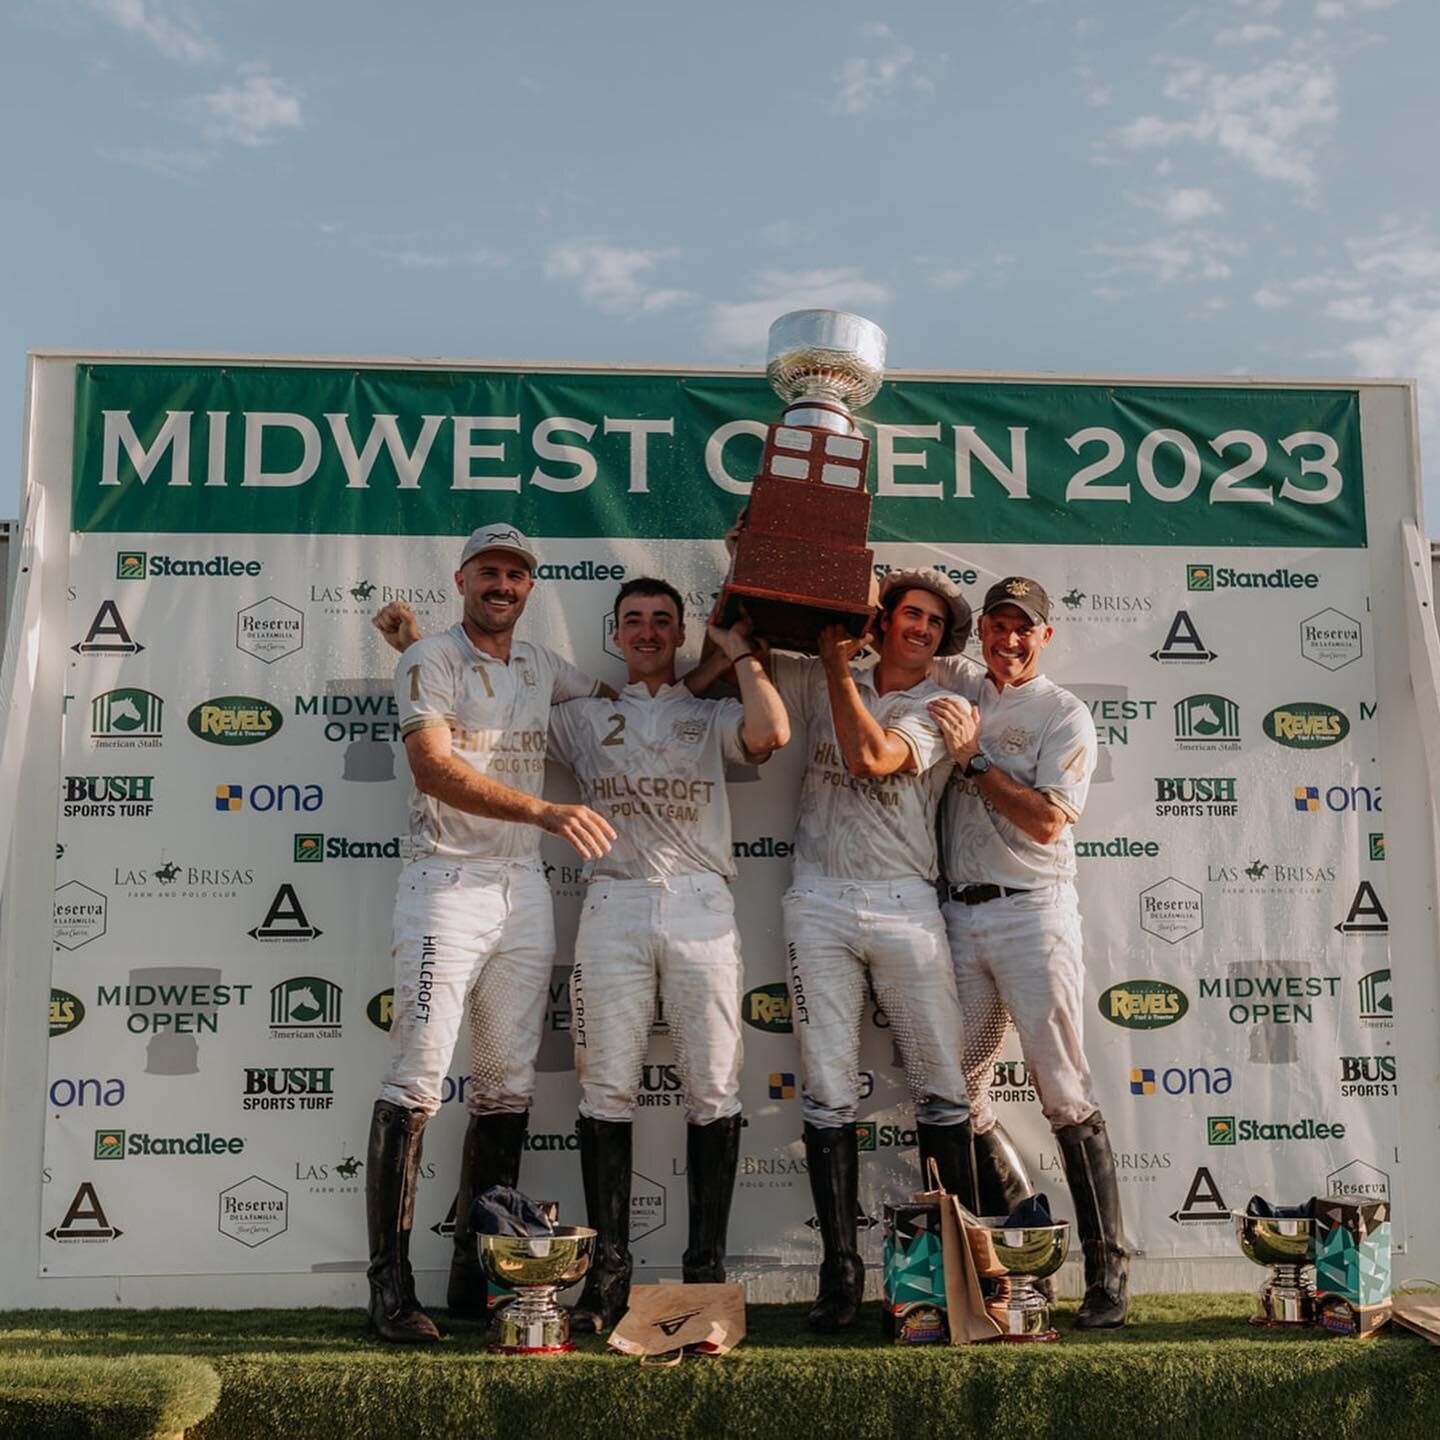 Congratulations to Hillcroft Polo for winning the 2023 14 Goal USPA Midwest Open 🏆

BPP Patron: Cupe, owned and played by James Miller

BPP Pro Horse: Pena Carioca owned and played by Juan Martin Obregon

MVP Patron: Larry Aschebrook

MVP Pro: Nachi